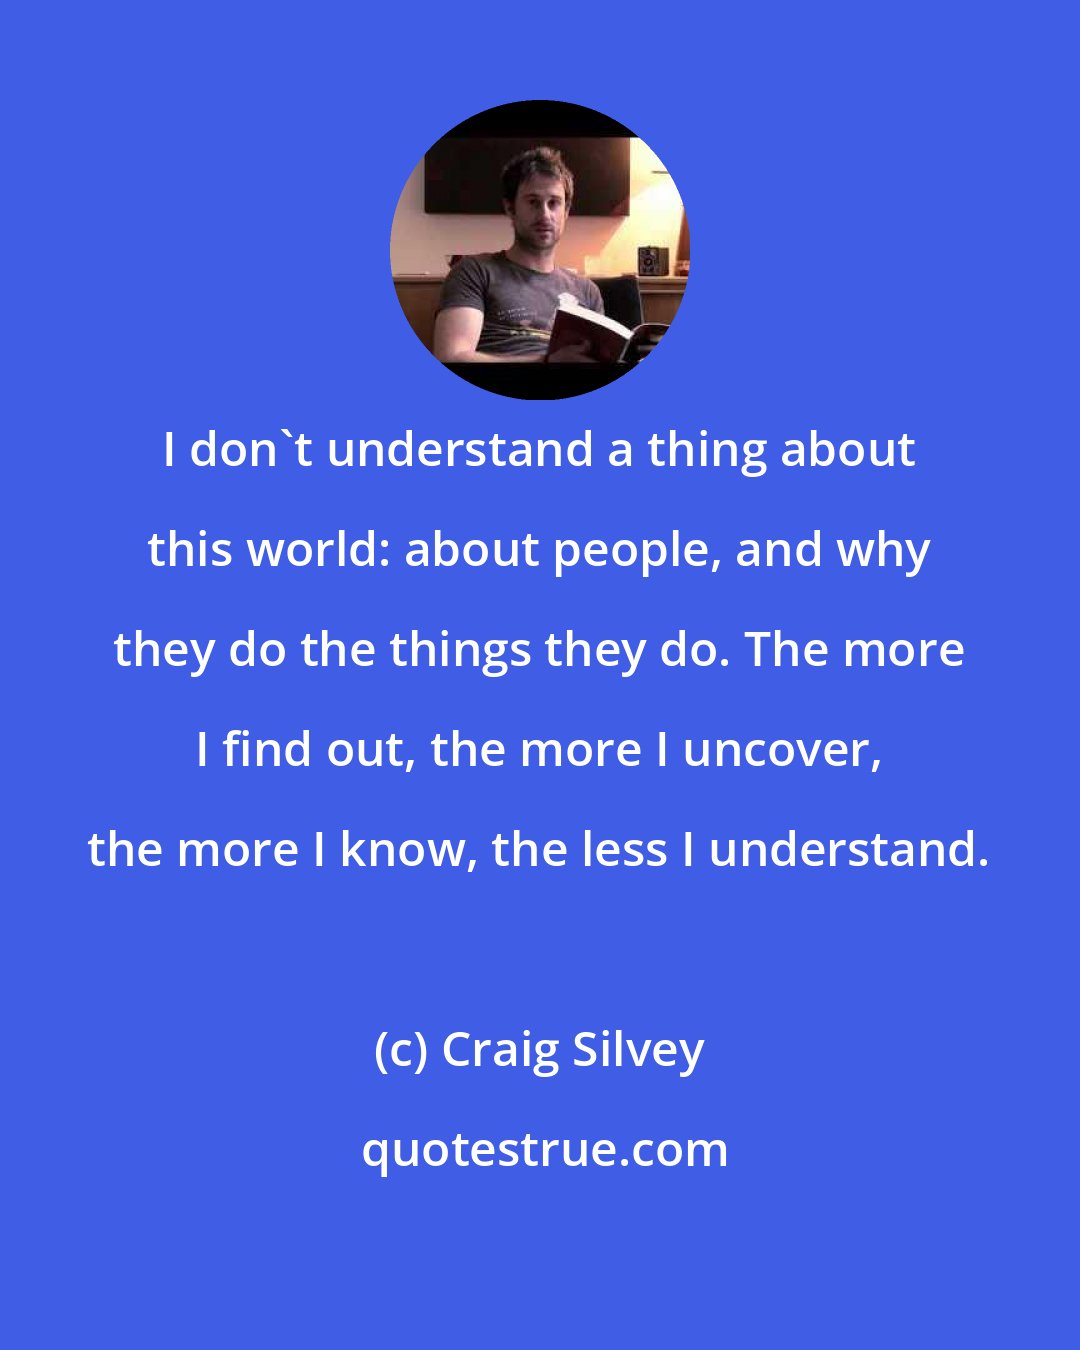 Craig Silvey: I don't understand a thing about this world: about people, and why they do the things they do. The more I find out, the more I uncover, the more I know, the less I understand.